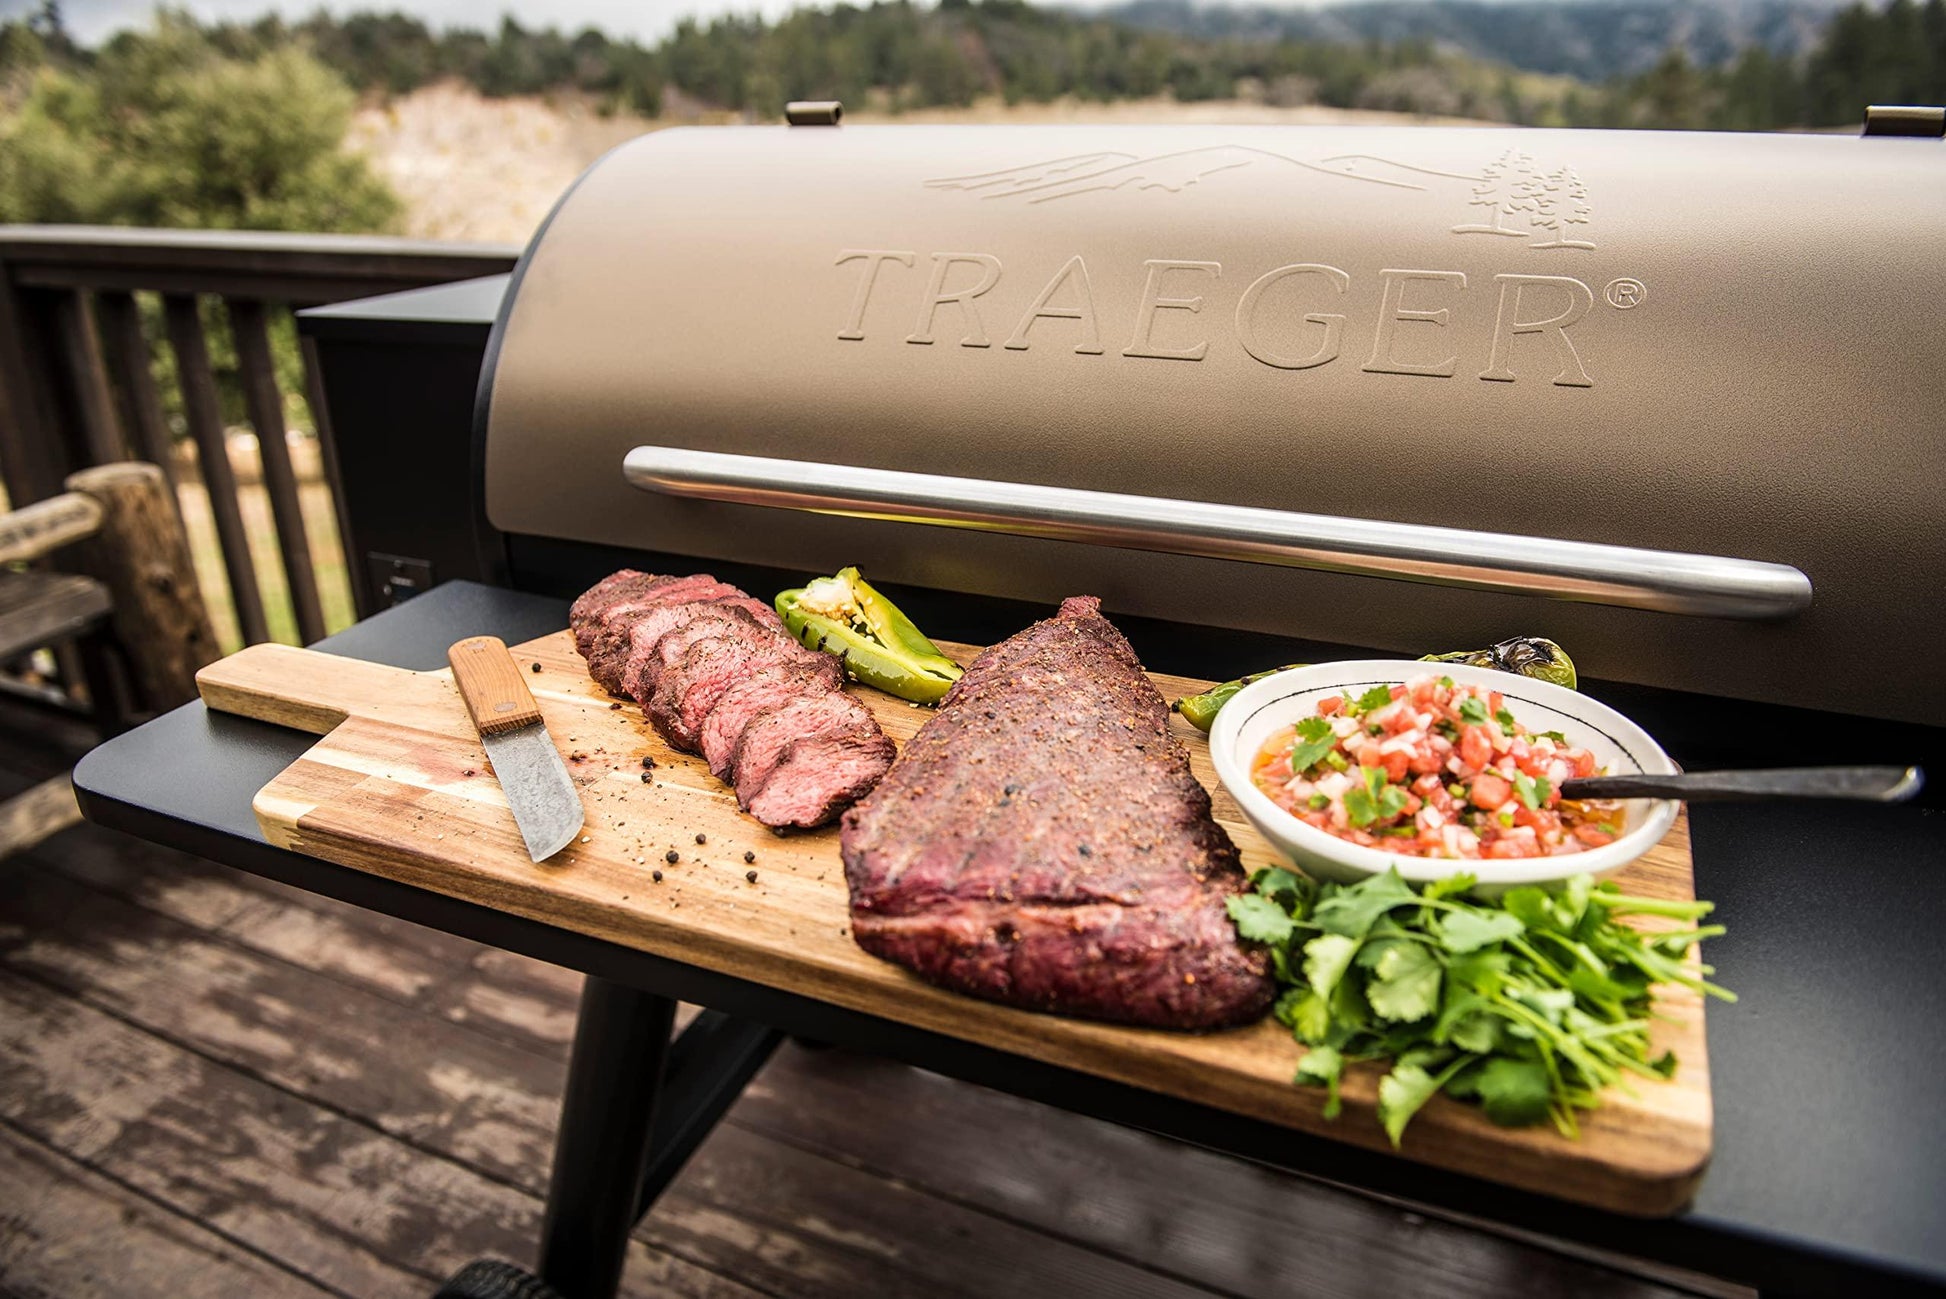 Traeger Grills Pro Series 34 Electric Wood Pellet Grill and Smoker, Bronze, Large - CookCave